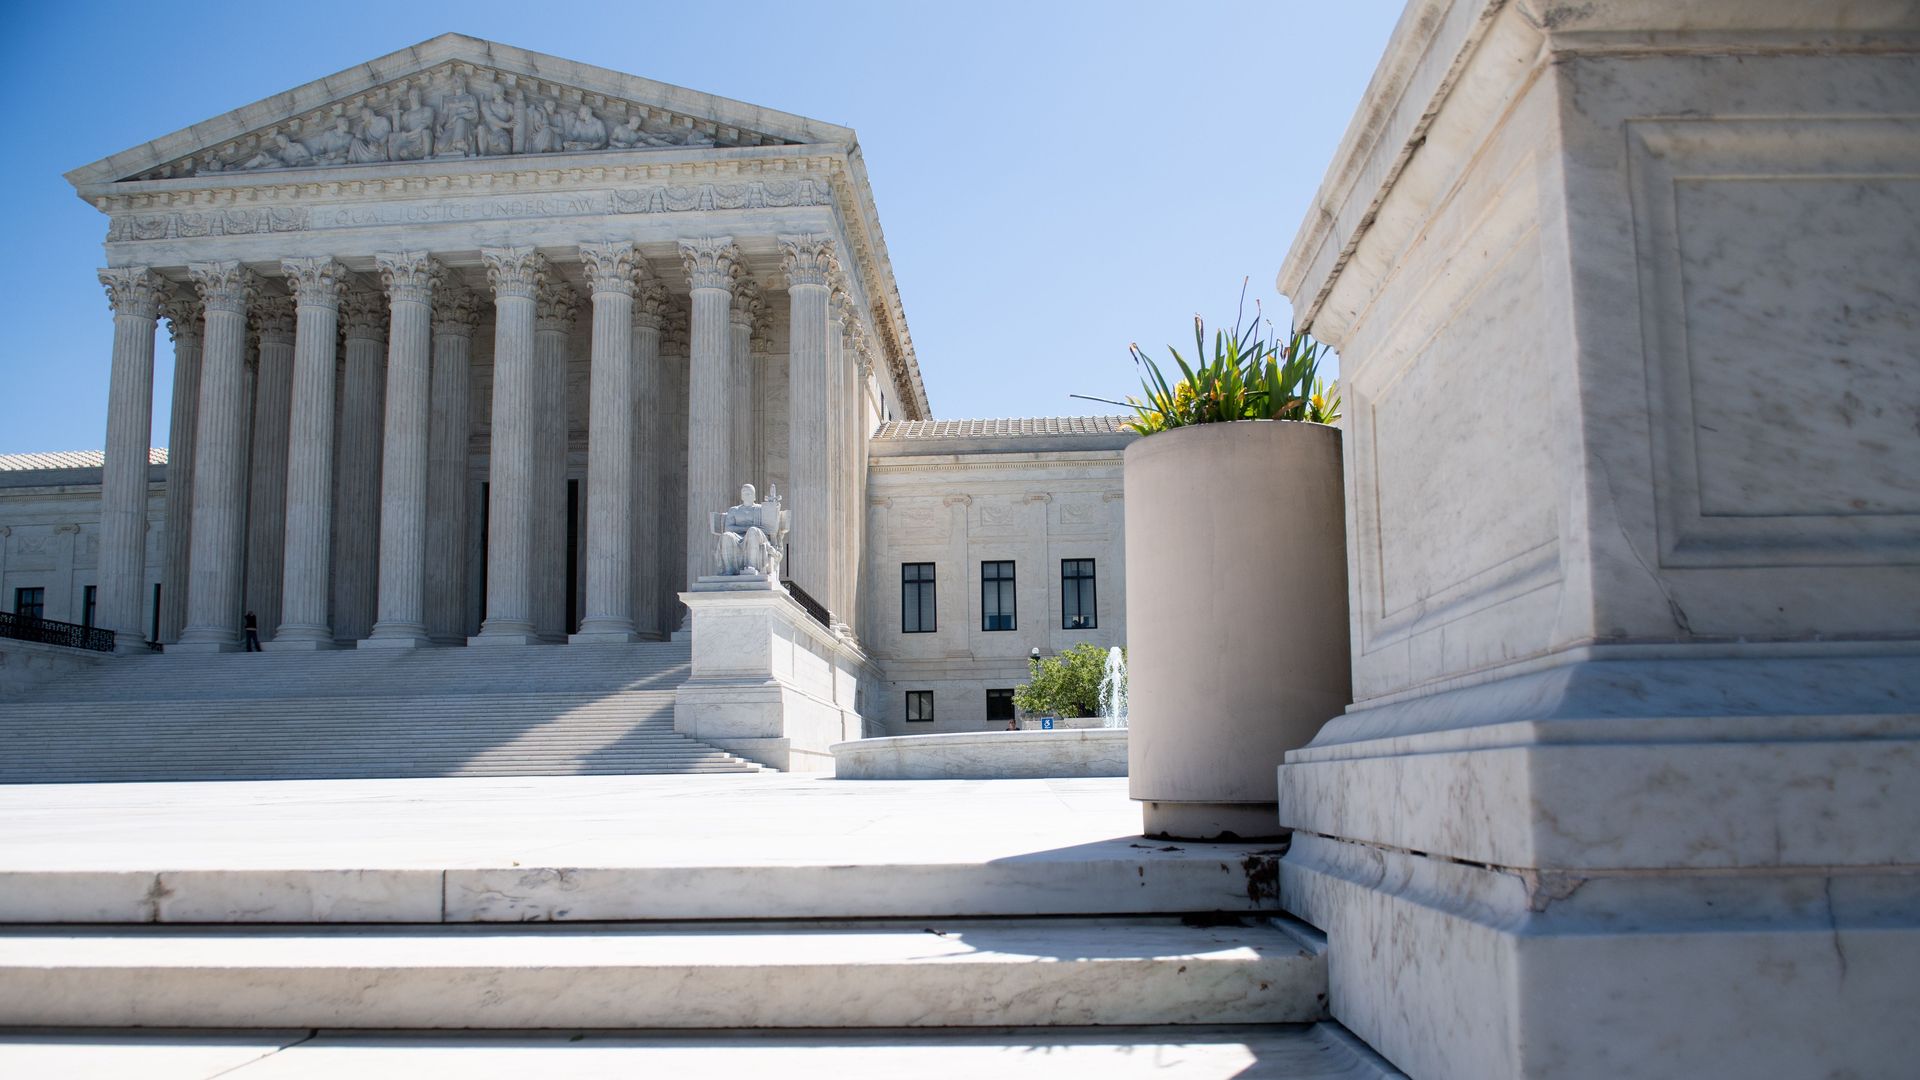  The US Supreme Court is seen in Washington, DC, on May 4